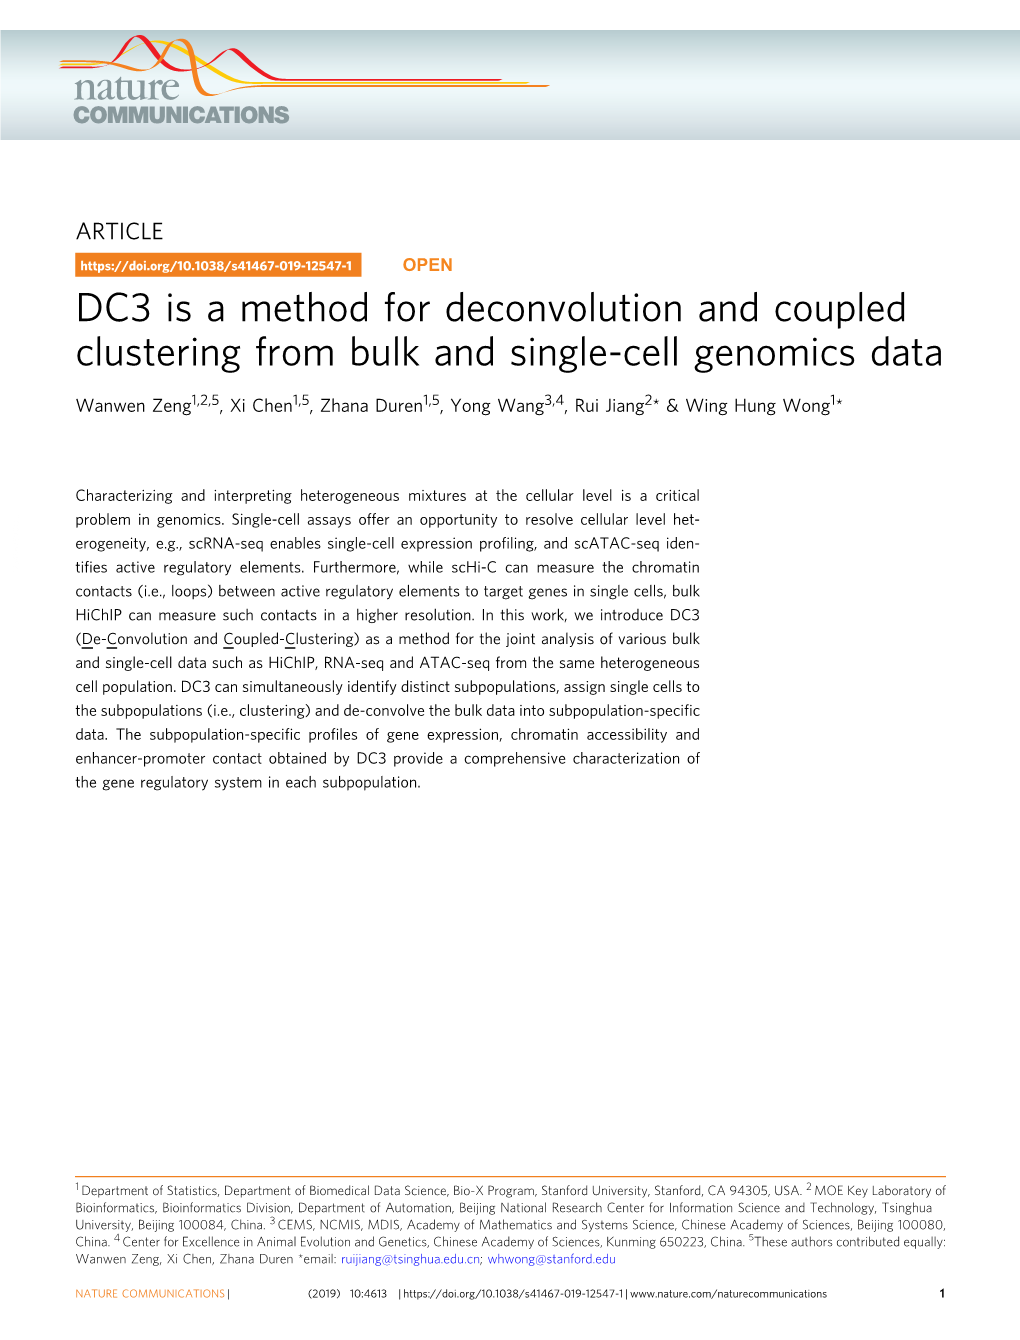 DC3 Is a Method for Deconvolution and Coupled Clustering from Bulk and Single-Cell Genomics Data